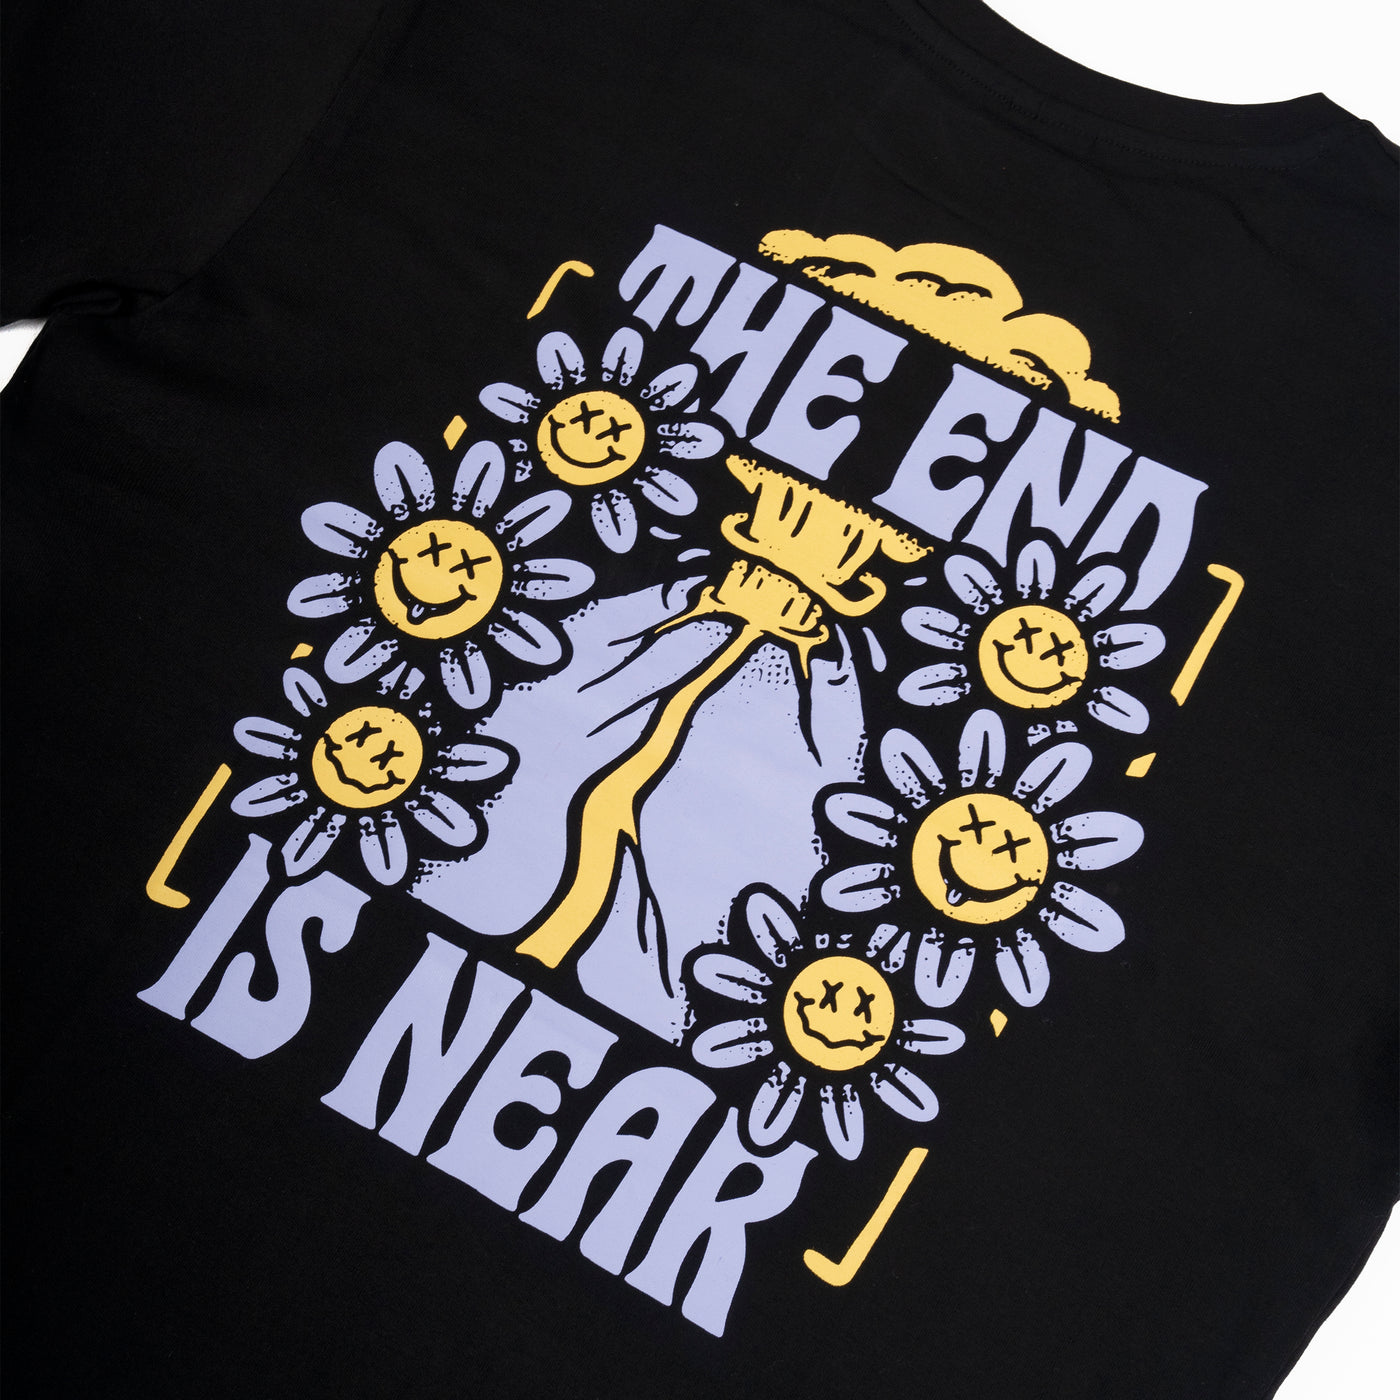 The End is Near - T-Shirt